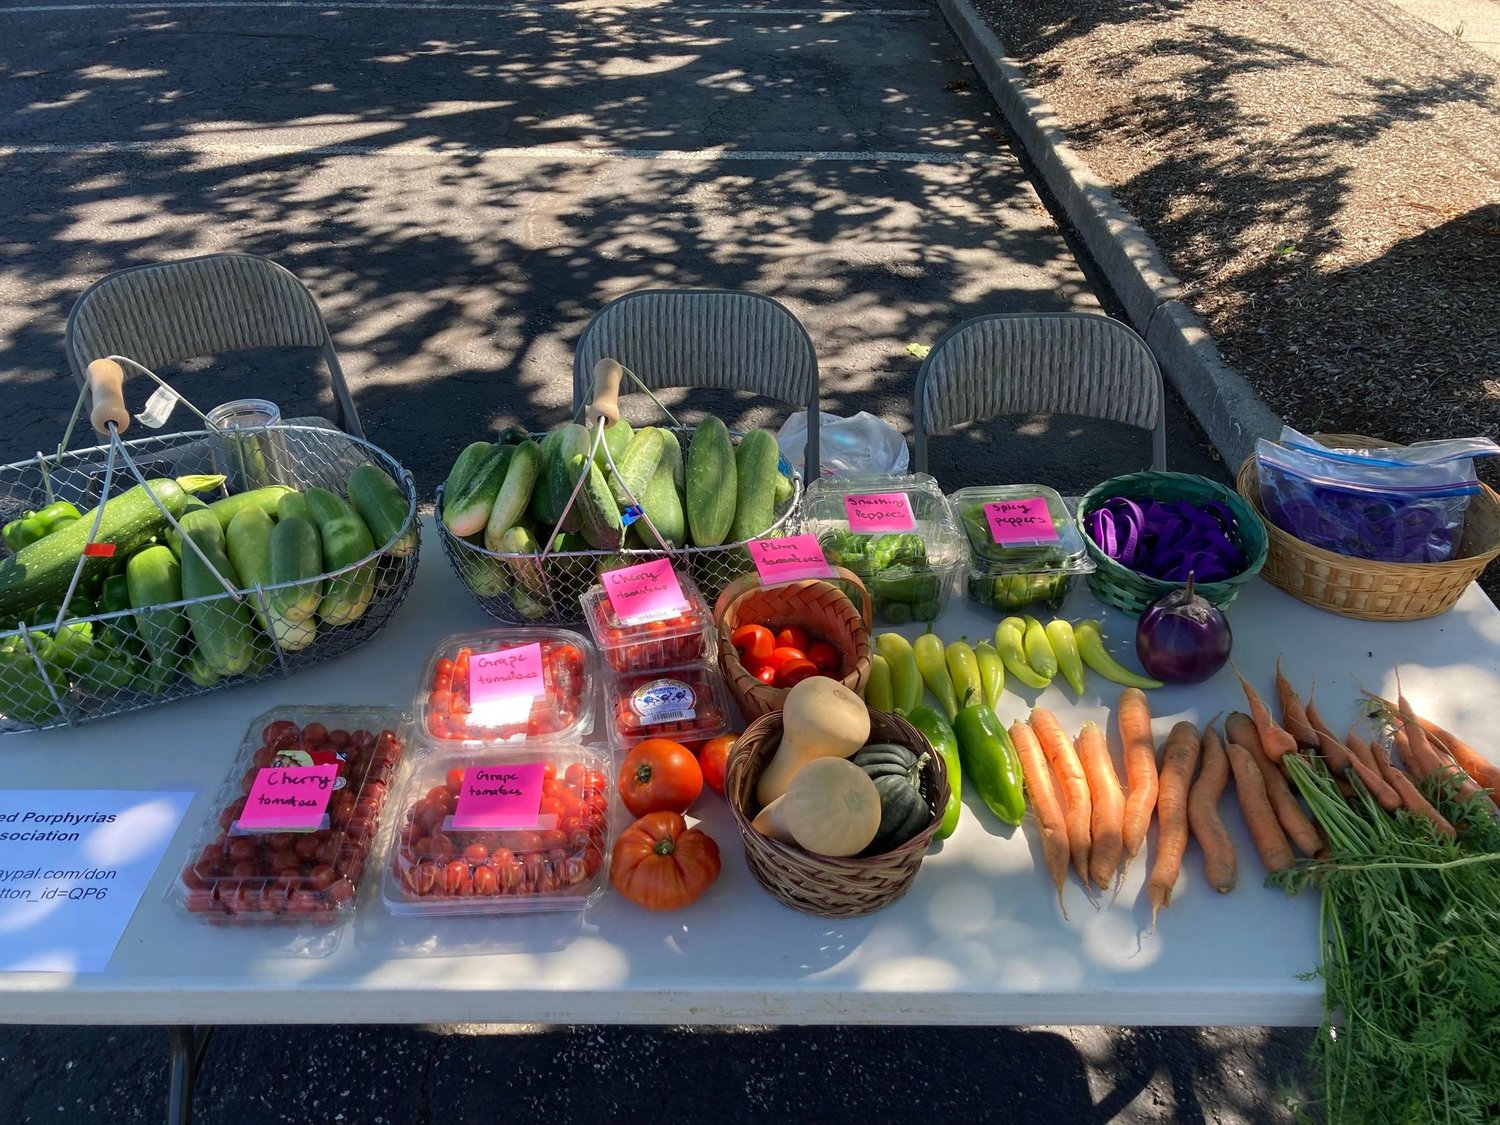 After a successful farm stand fundraiser last year that culminated in a donation of over $600 to a porphyria organization, Morgan McKillop and her family decided to host another sale of their homegrown vegetables.